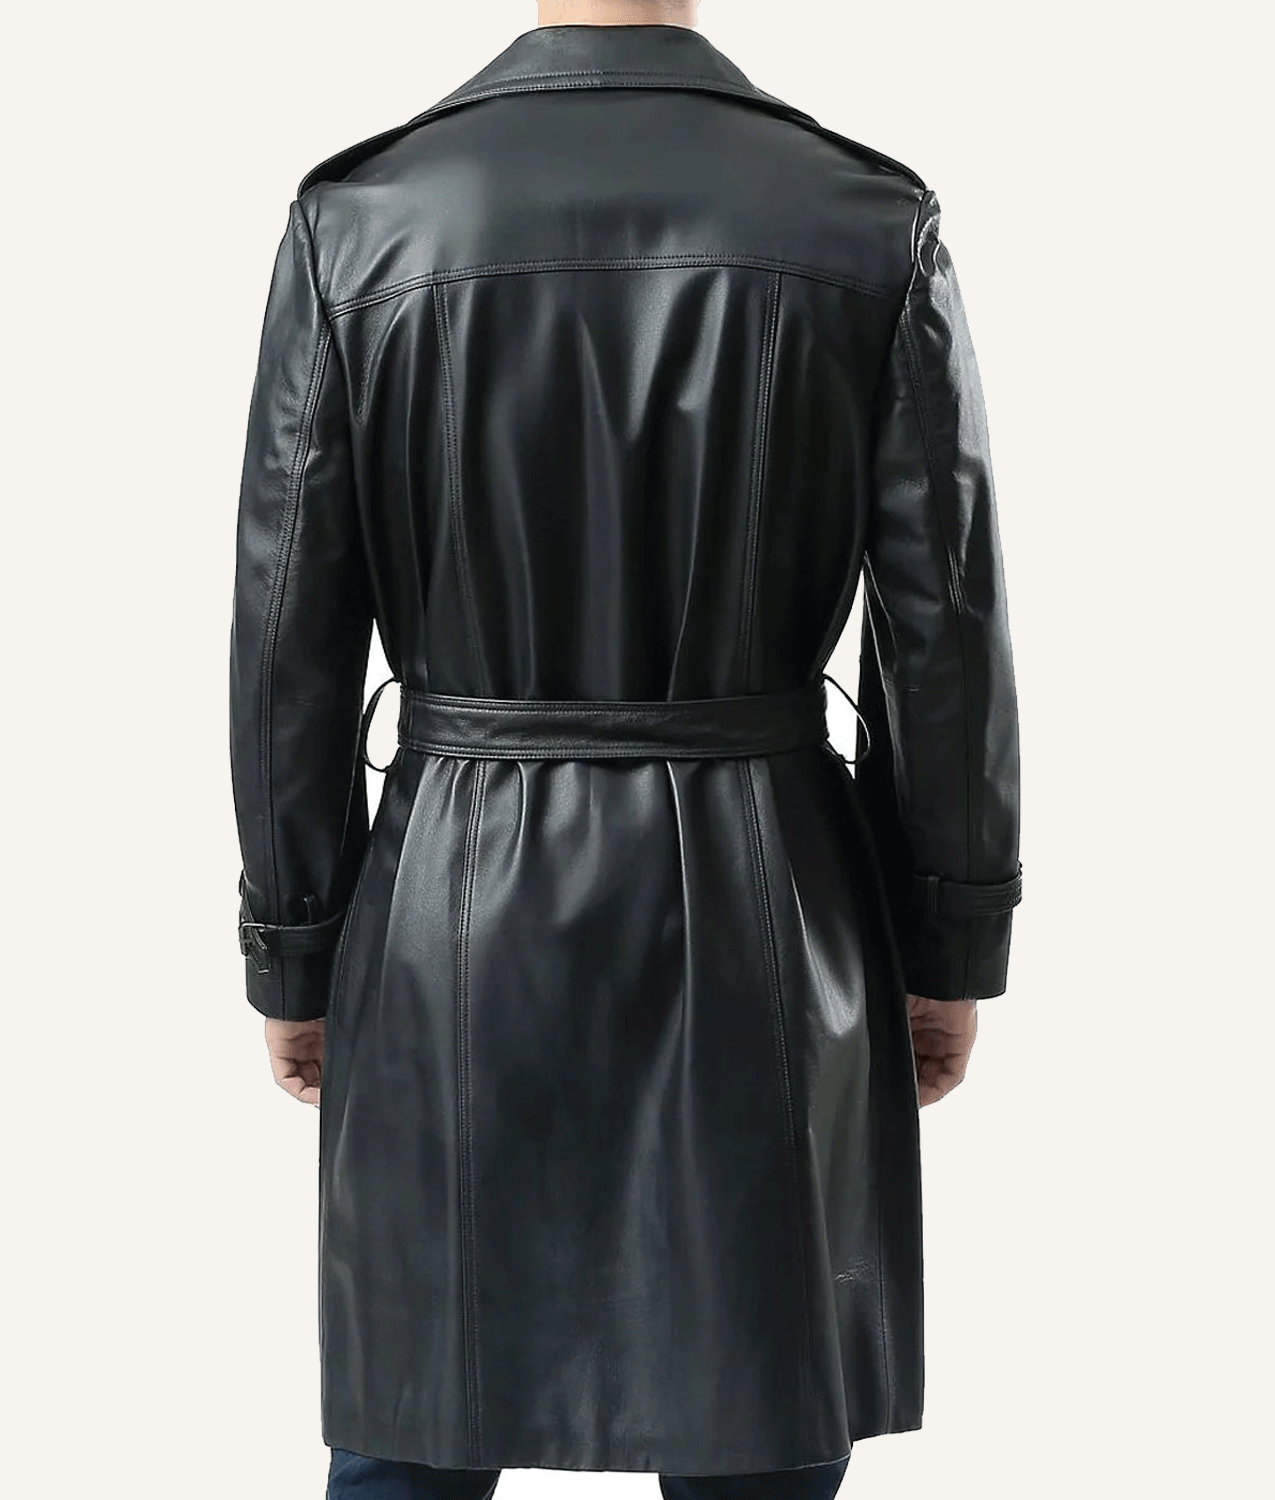 Adam Lambert Double Breasted Leather Coat - A2 Jackets